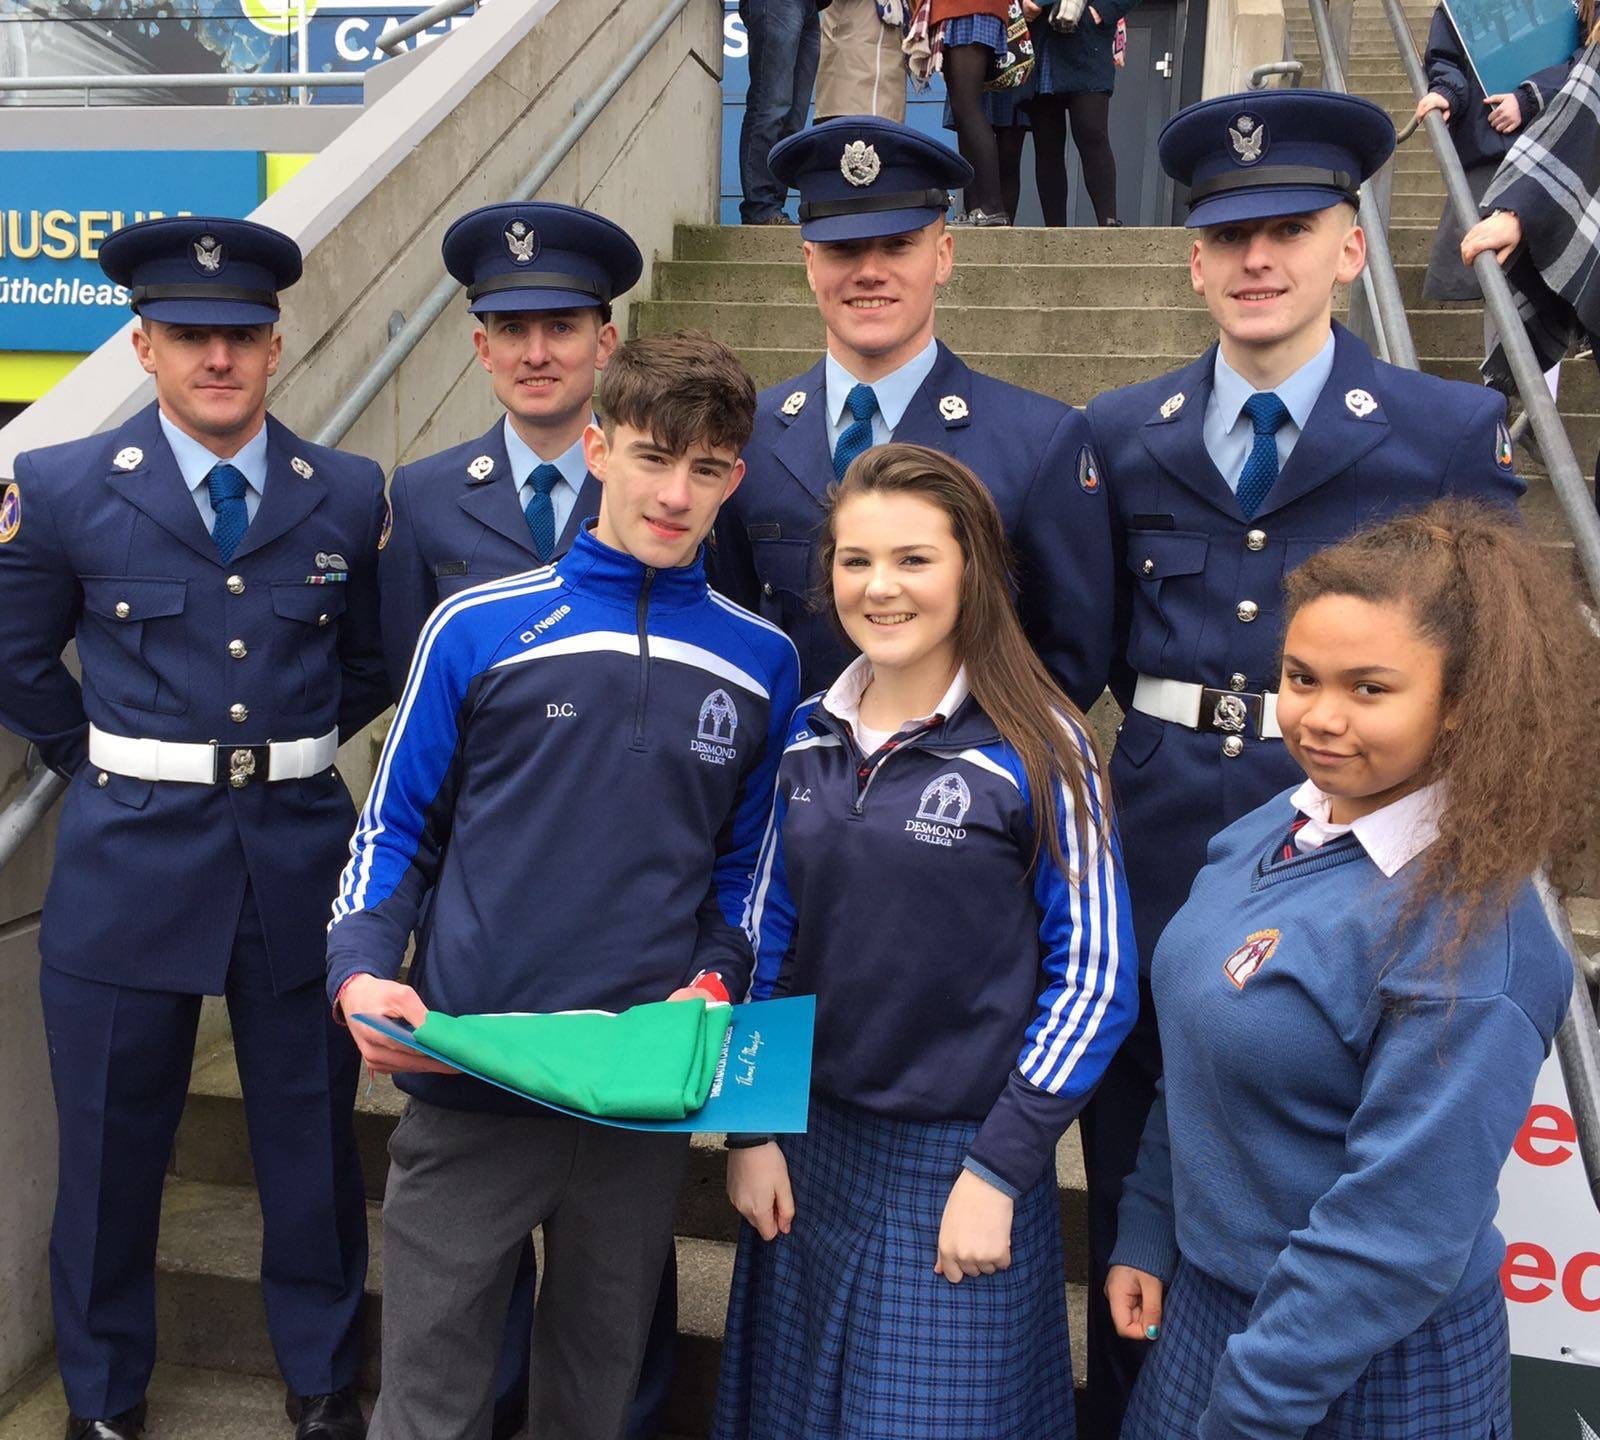 March 2016: Desmond College Students Collecting the Flag at the 1916 Commemoration Service in Croke Park